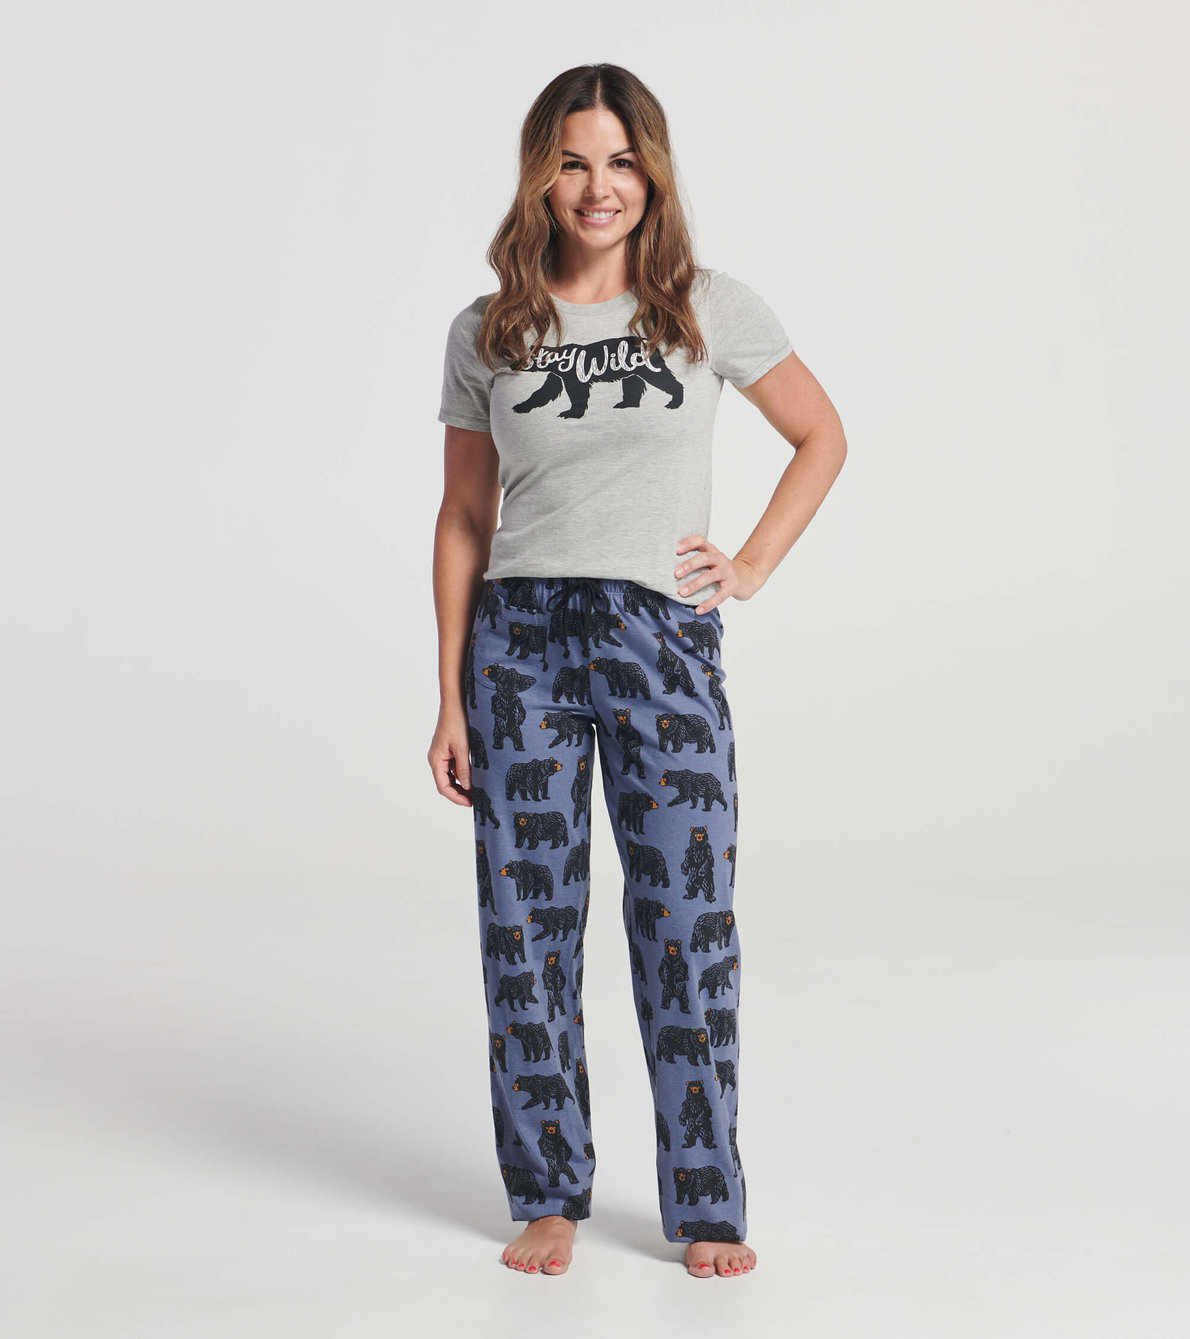 View larger image of Stay Wild Women's Pajama Tee